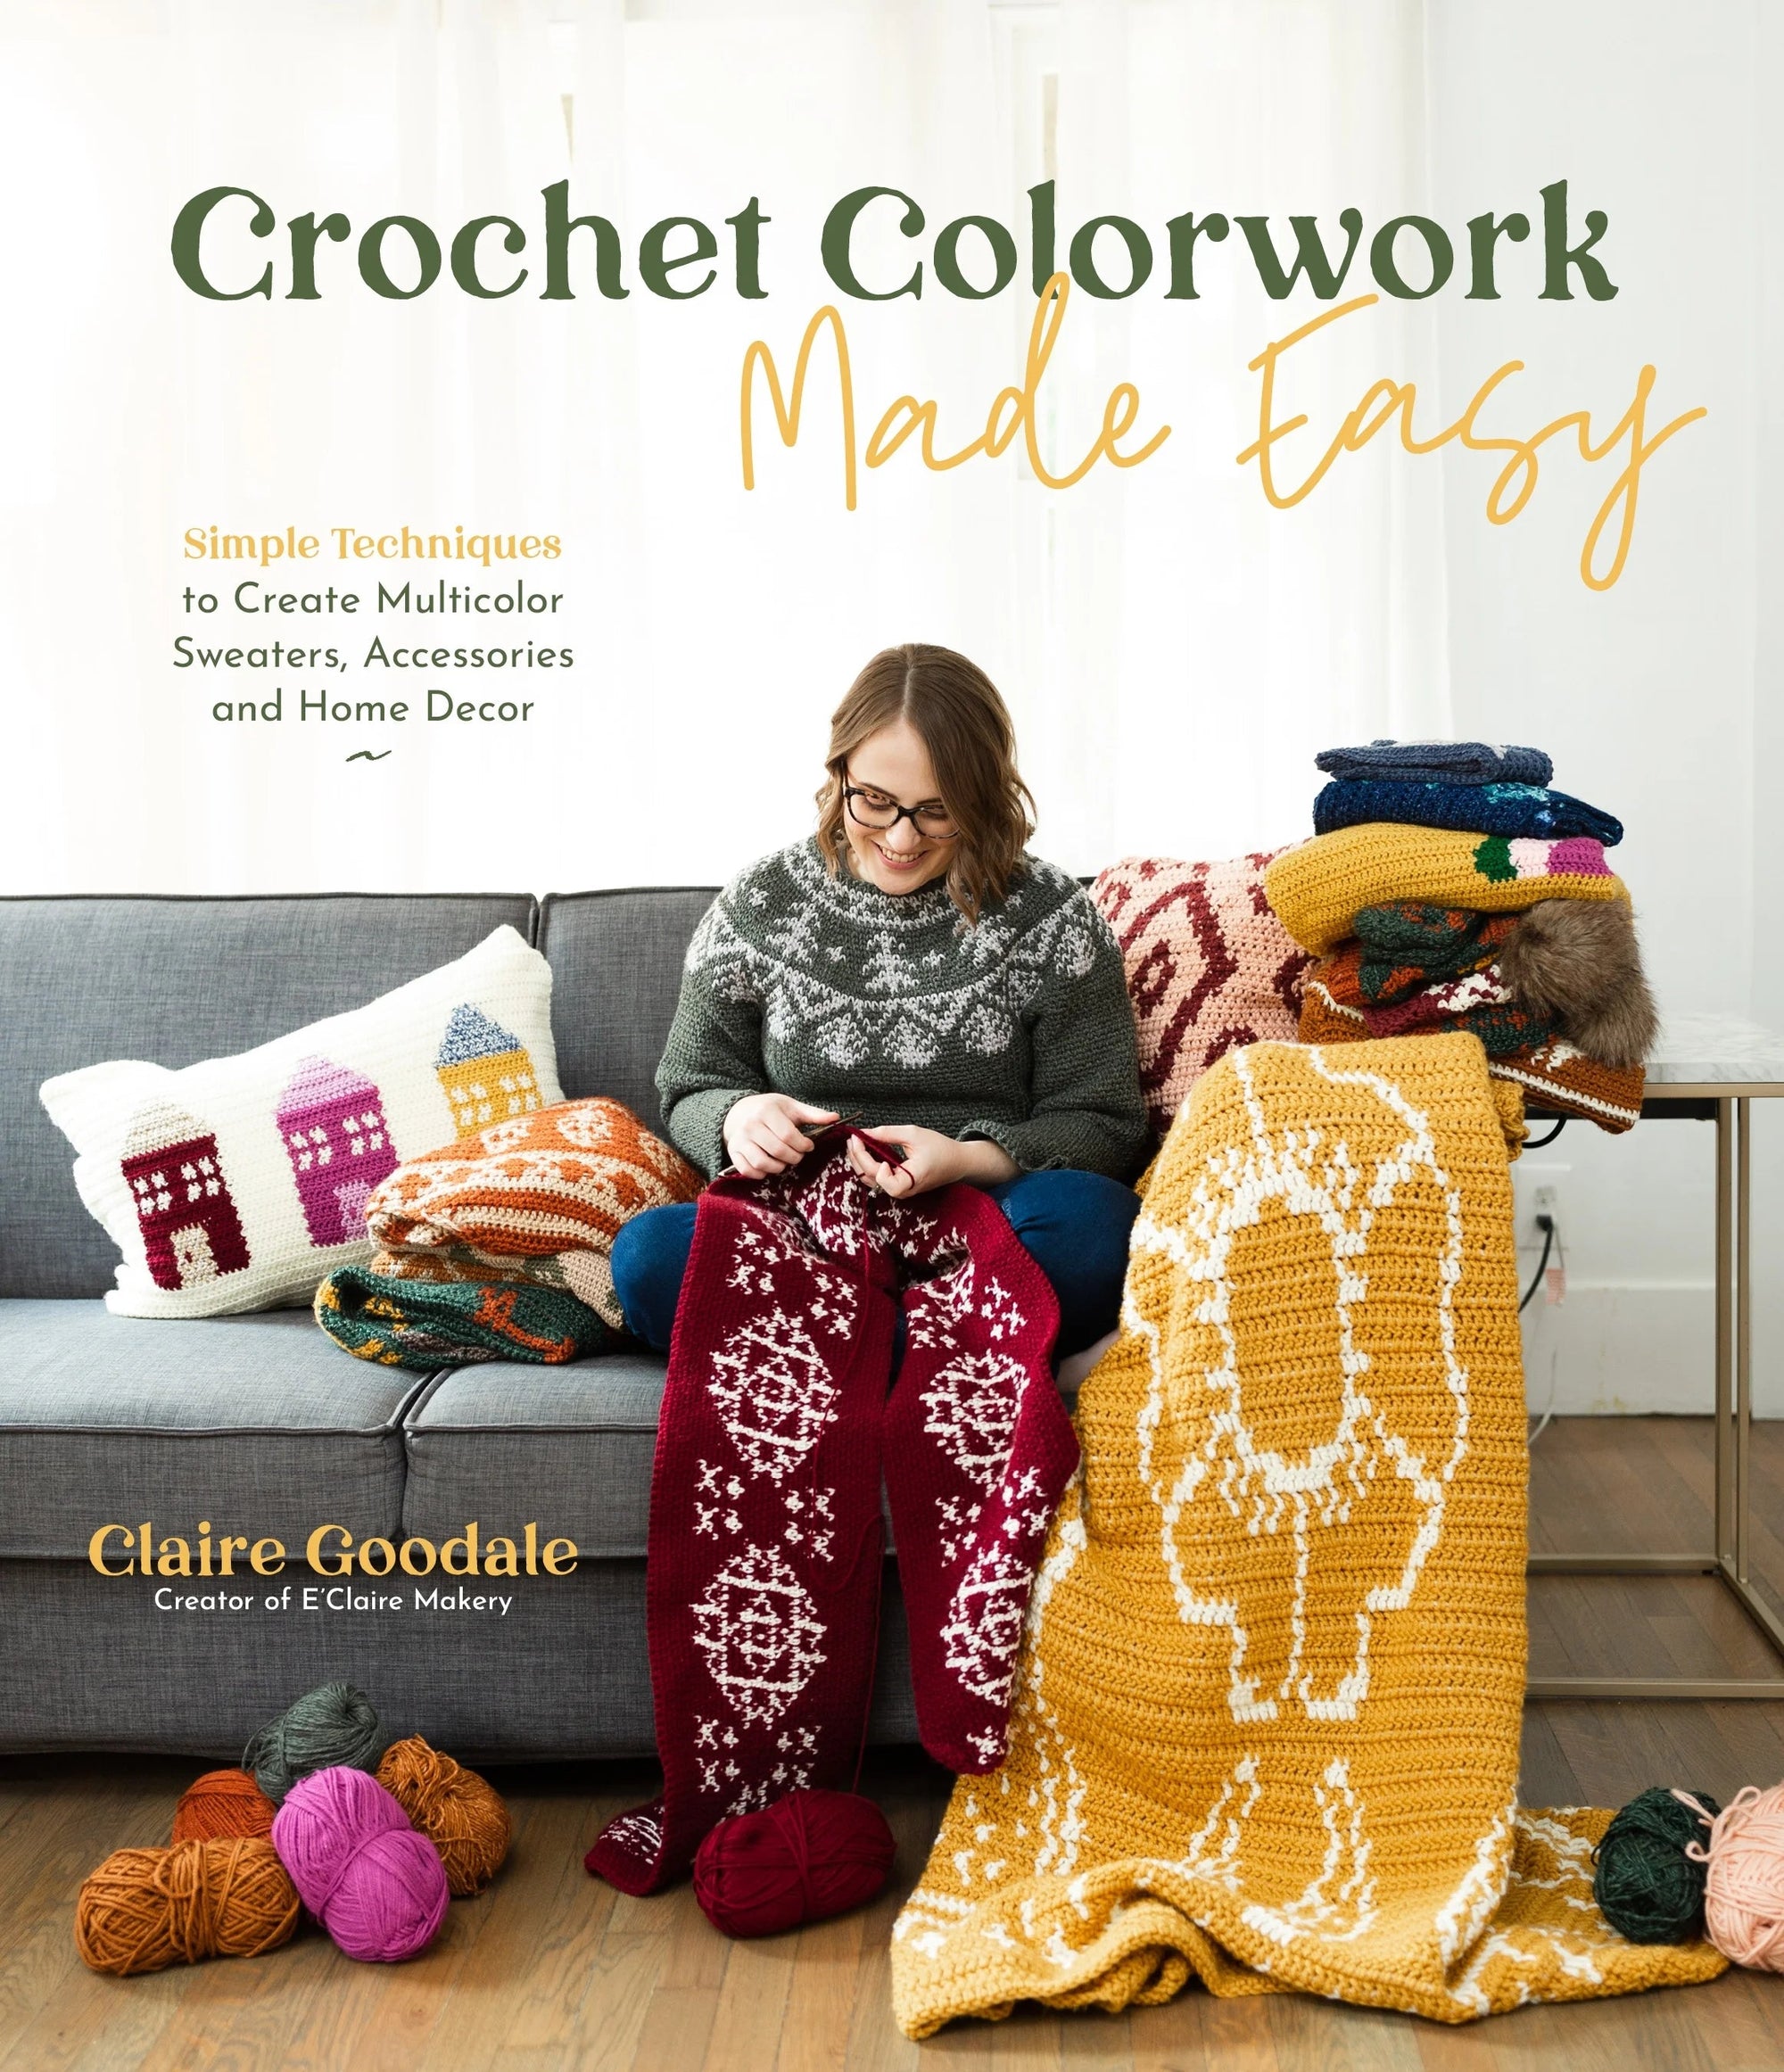 Crochet Colourwork Made Easy - Claire Goodale - The Little Yarn Store